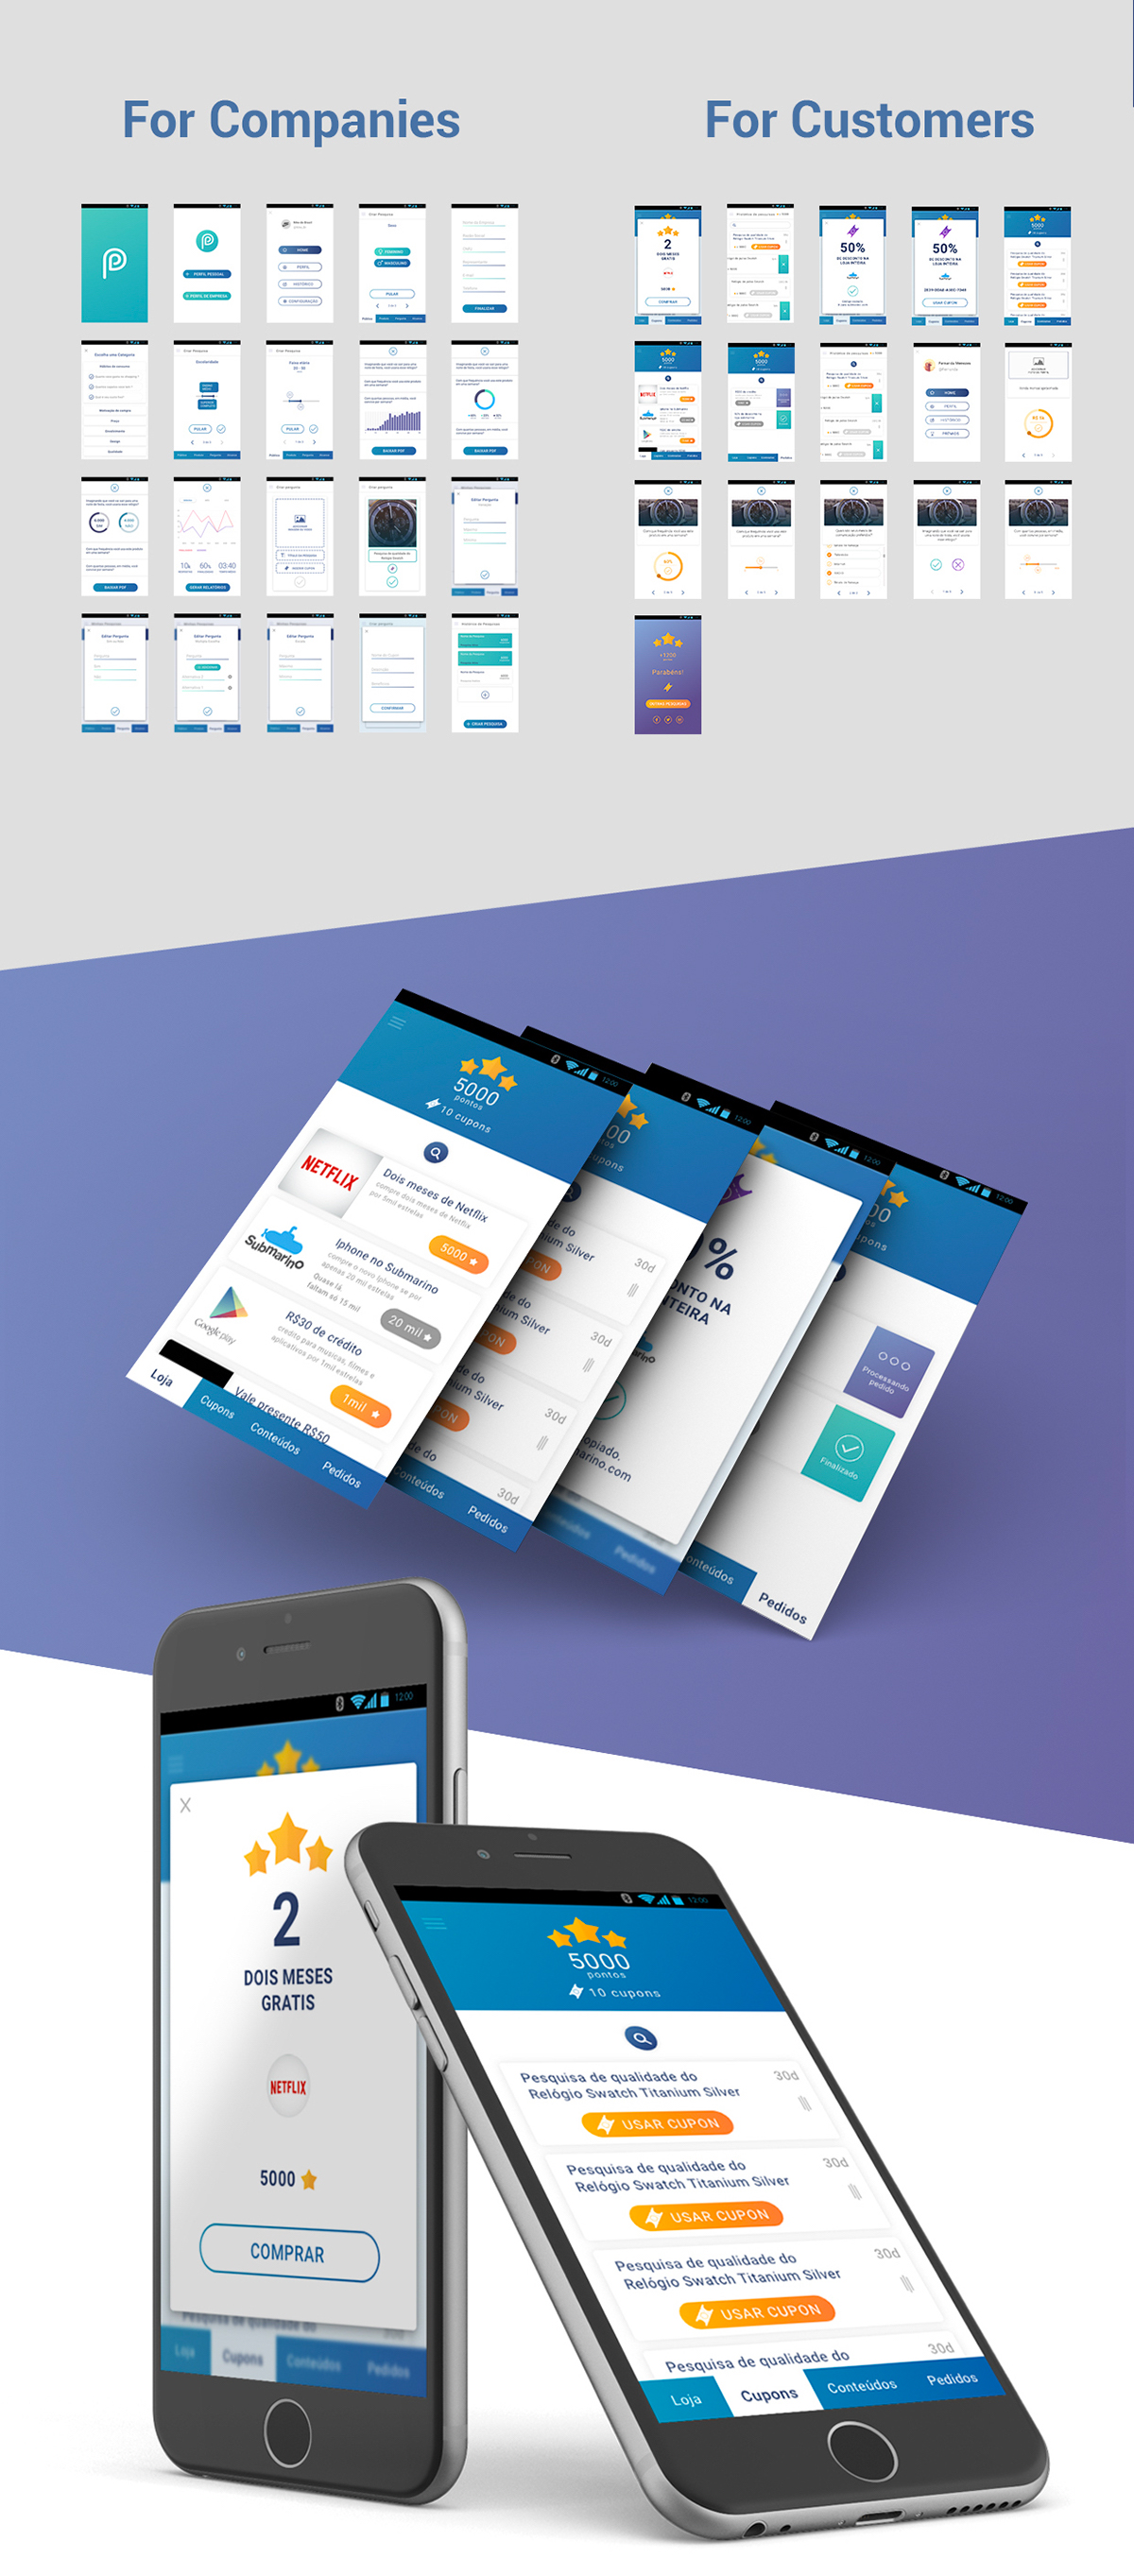 app mobile Interface interactions user experience Business Design Service design